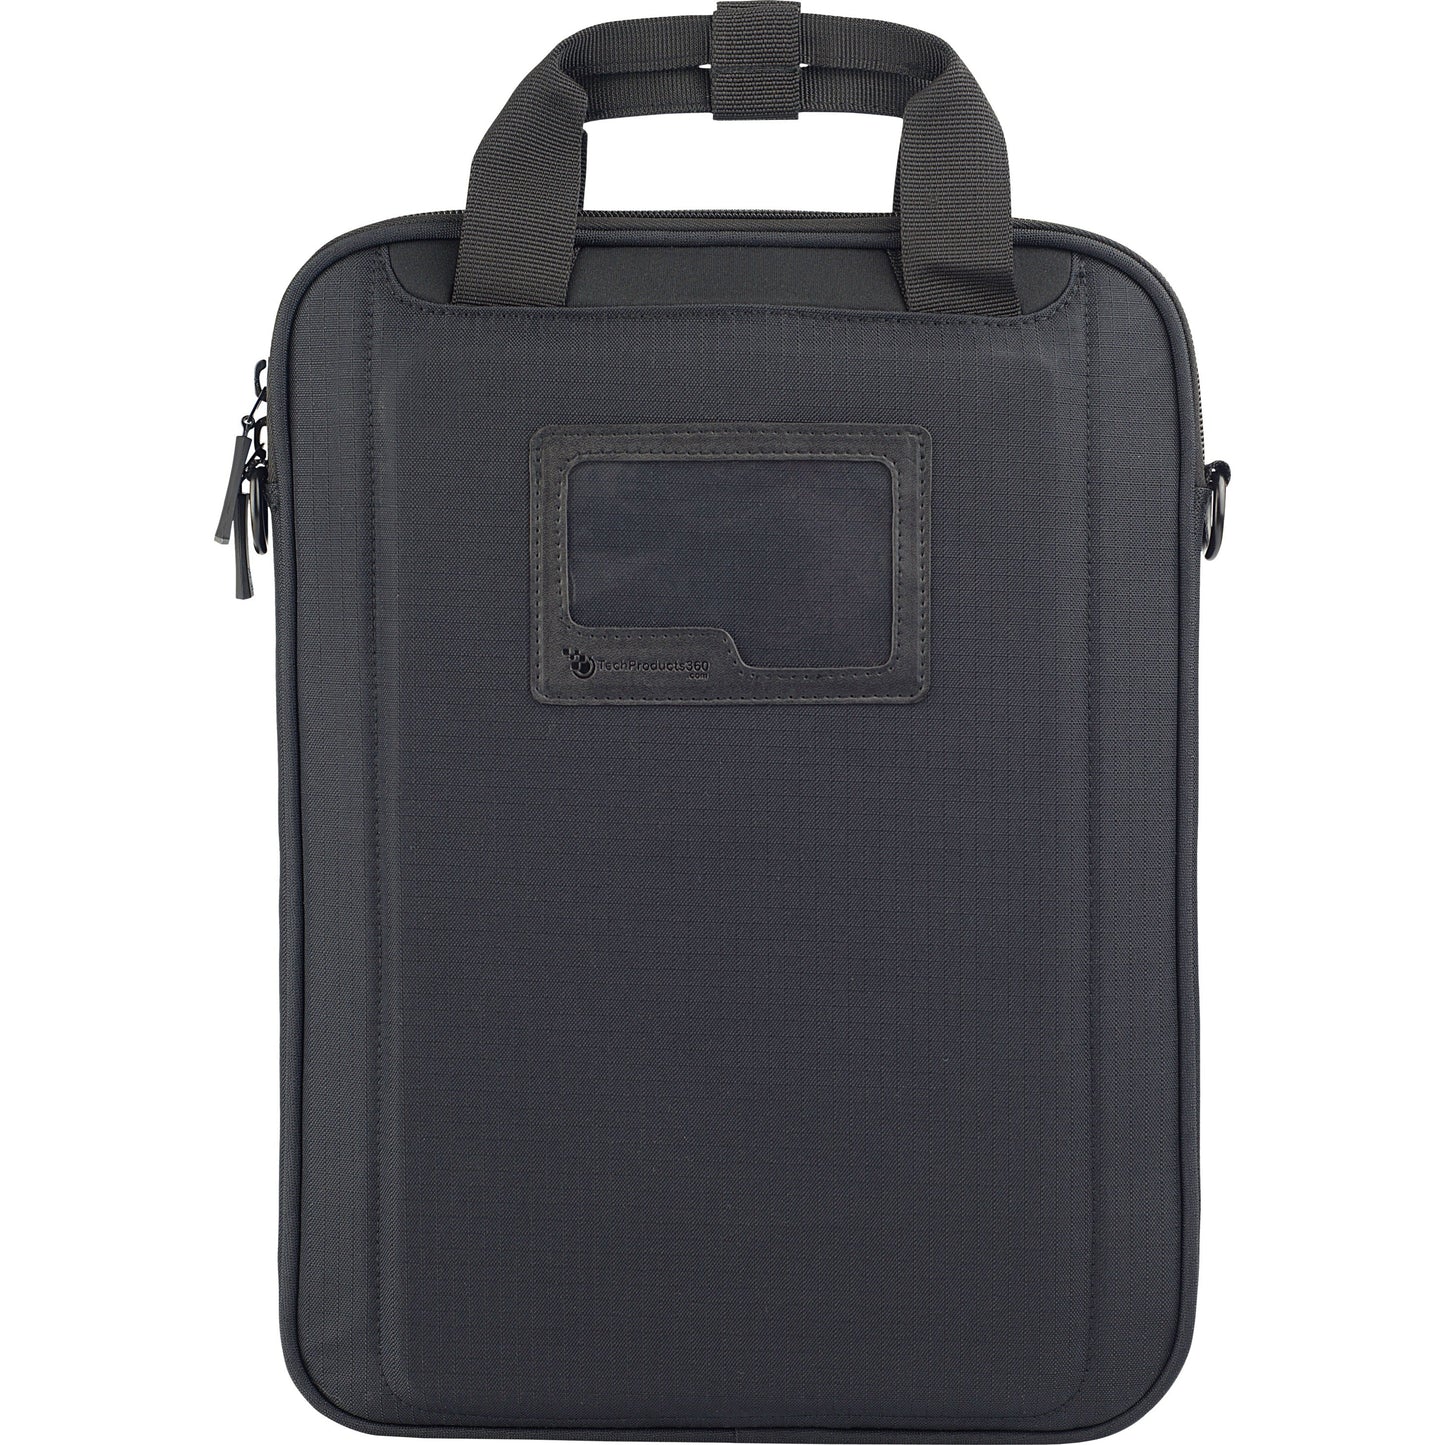 TechProducts360 Vertical Vault Carrying Case for 13" Notebook - Black